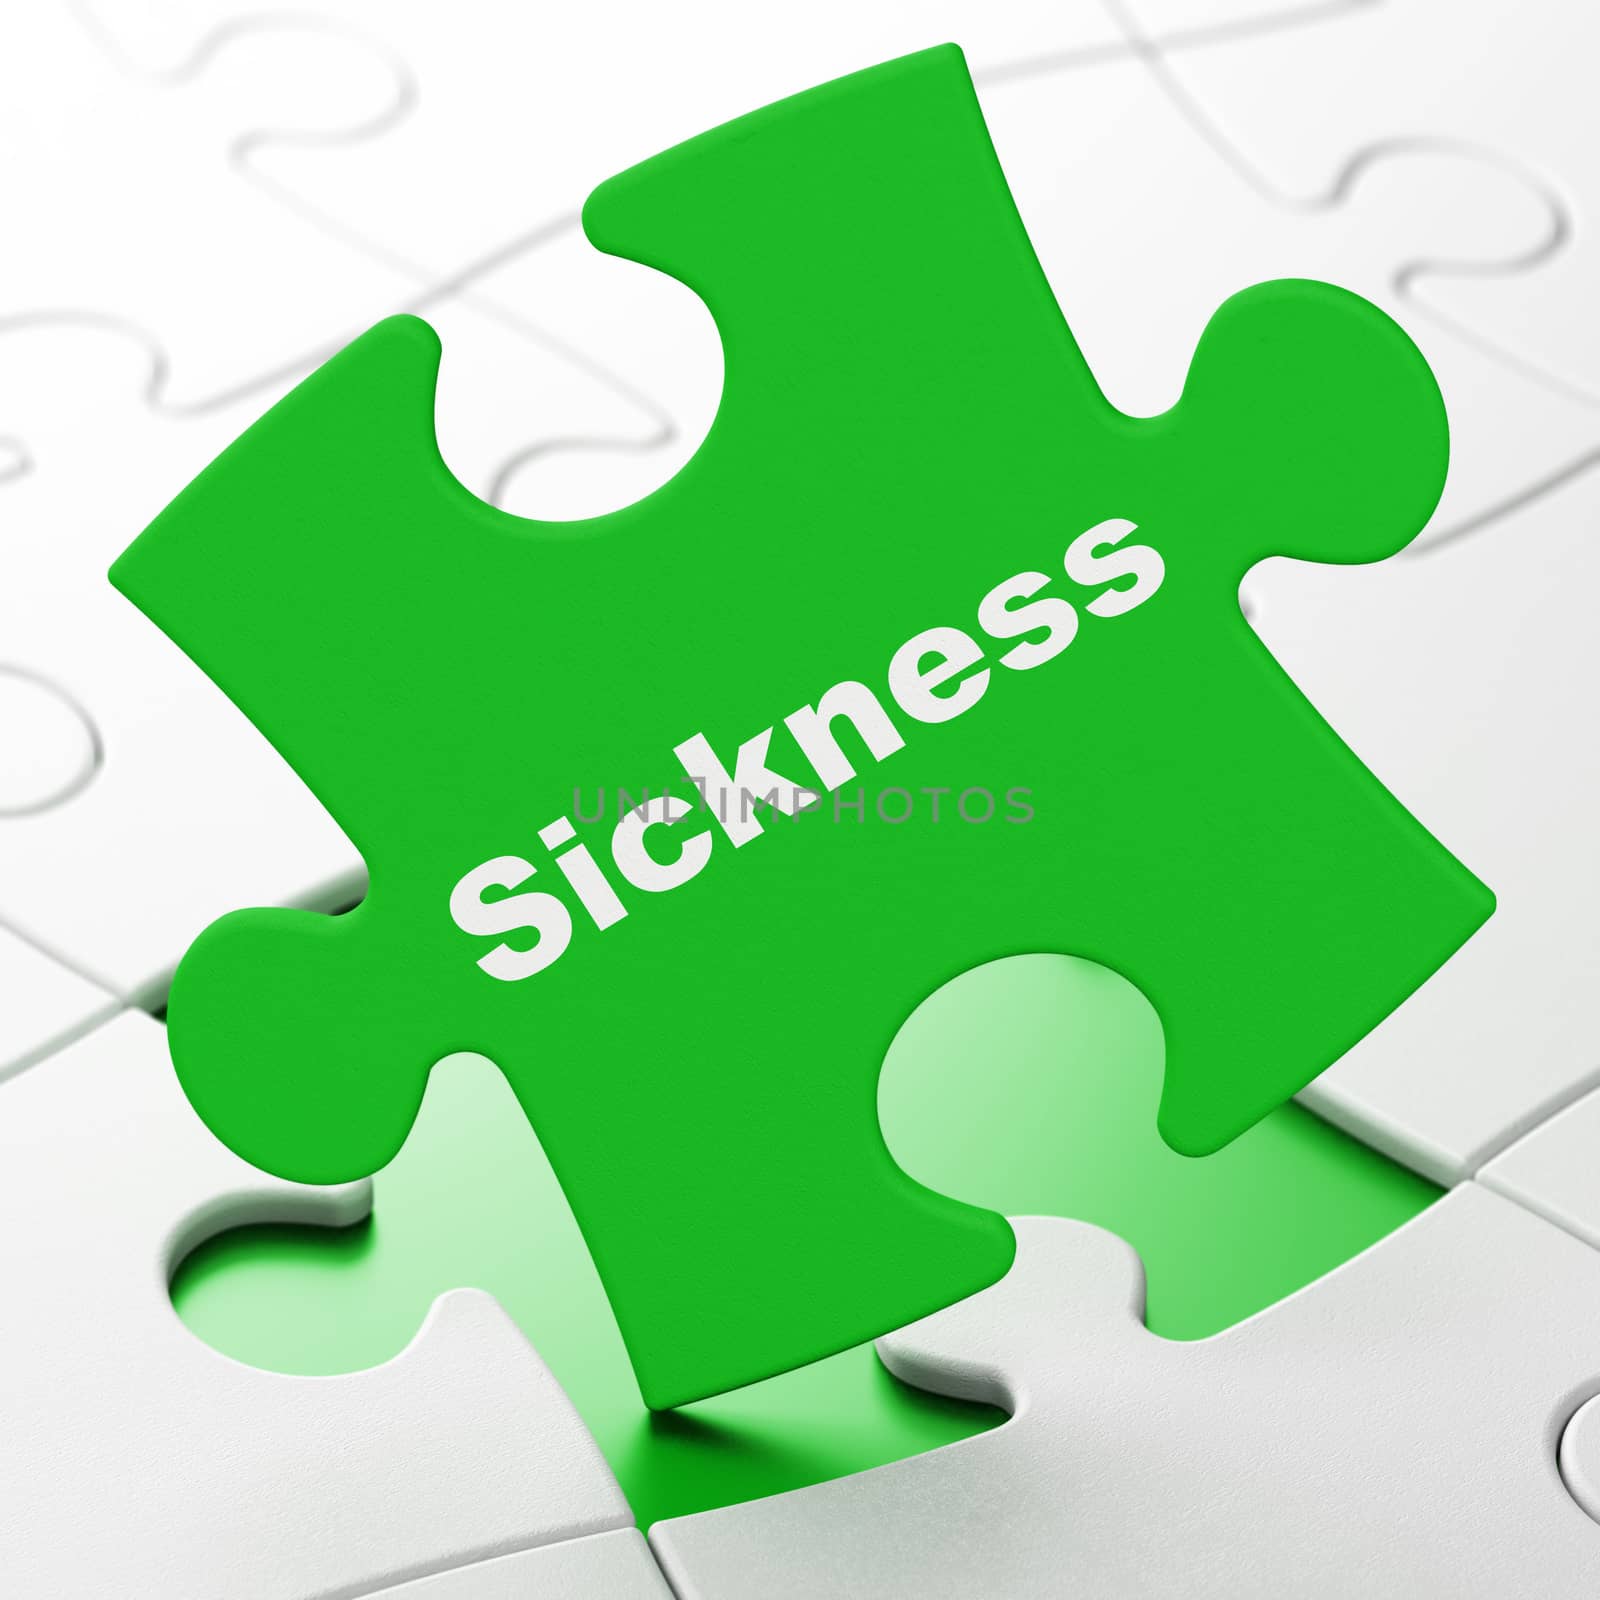 Healthcare concept: Sickness on Green puzzle pieces background, 3D rendering